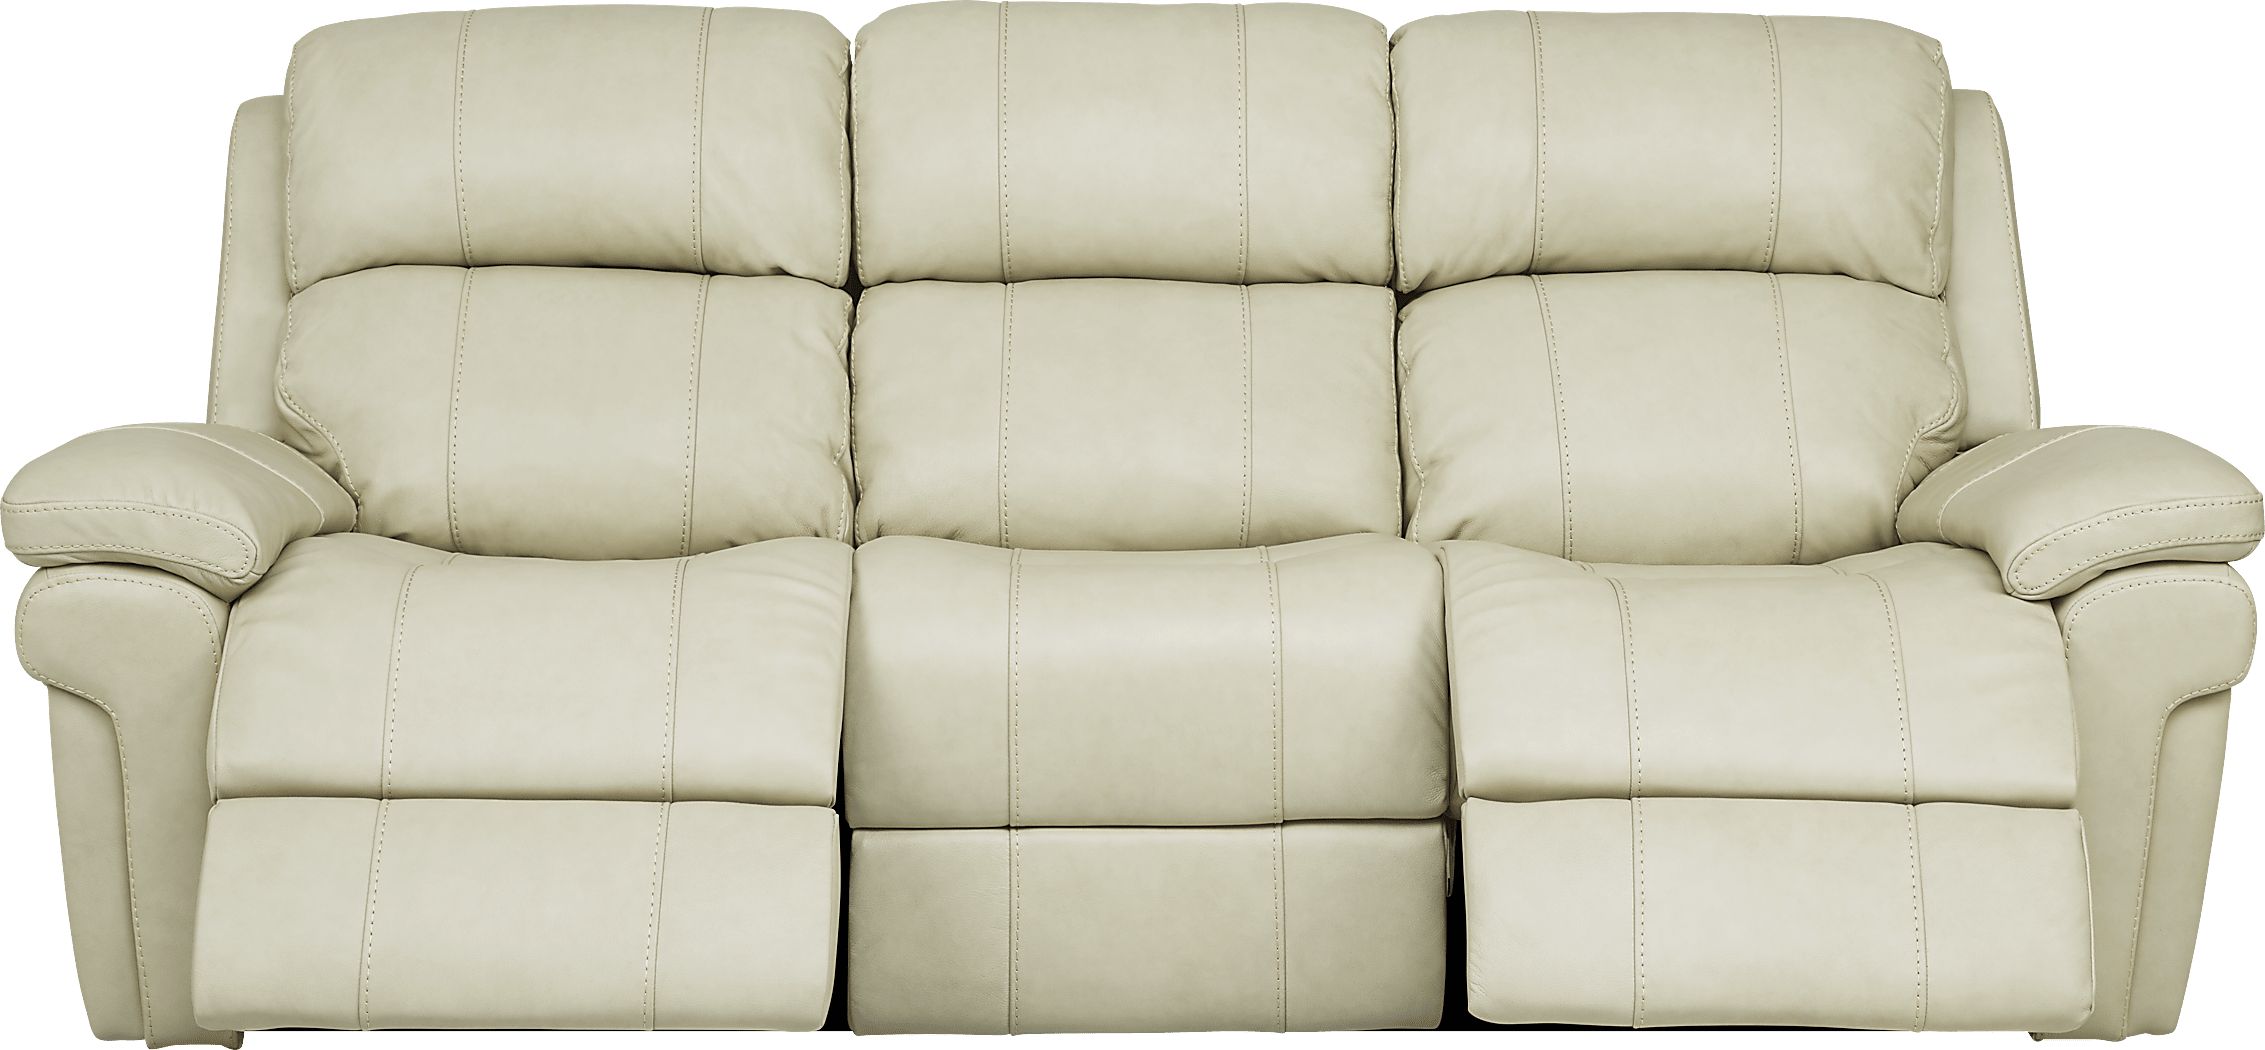 Rooms To Go Trevino Place Cream Leather Dual Power Reclining Sofa